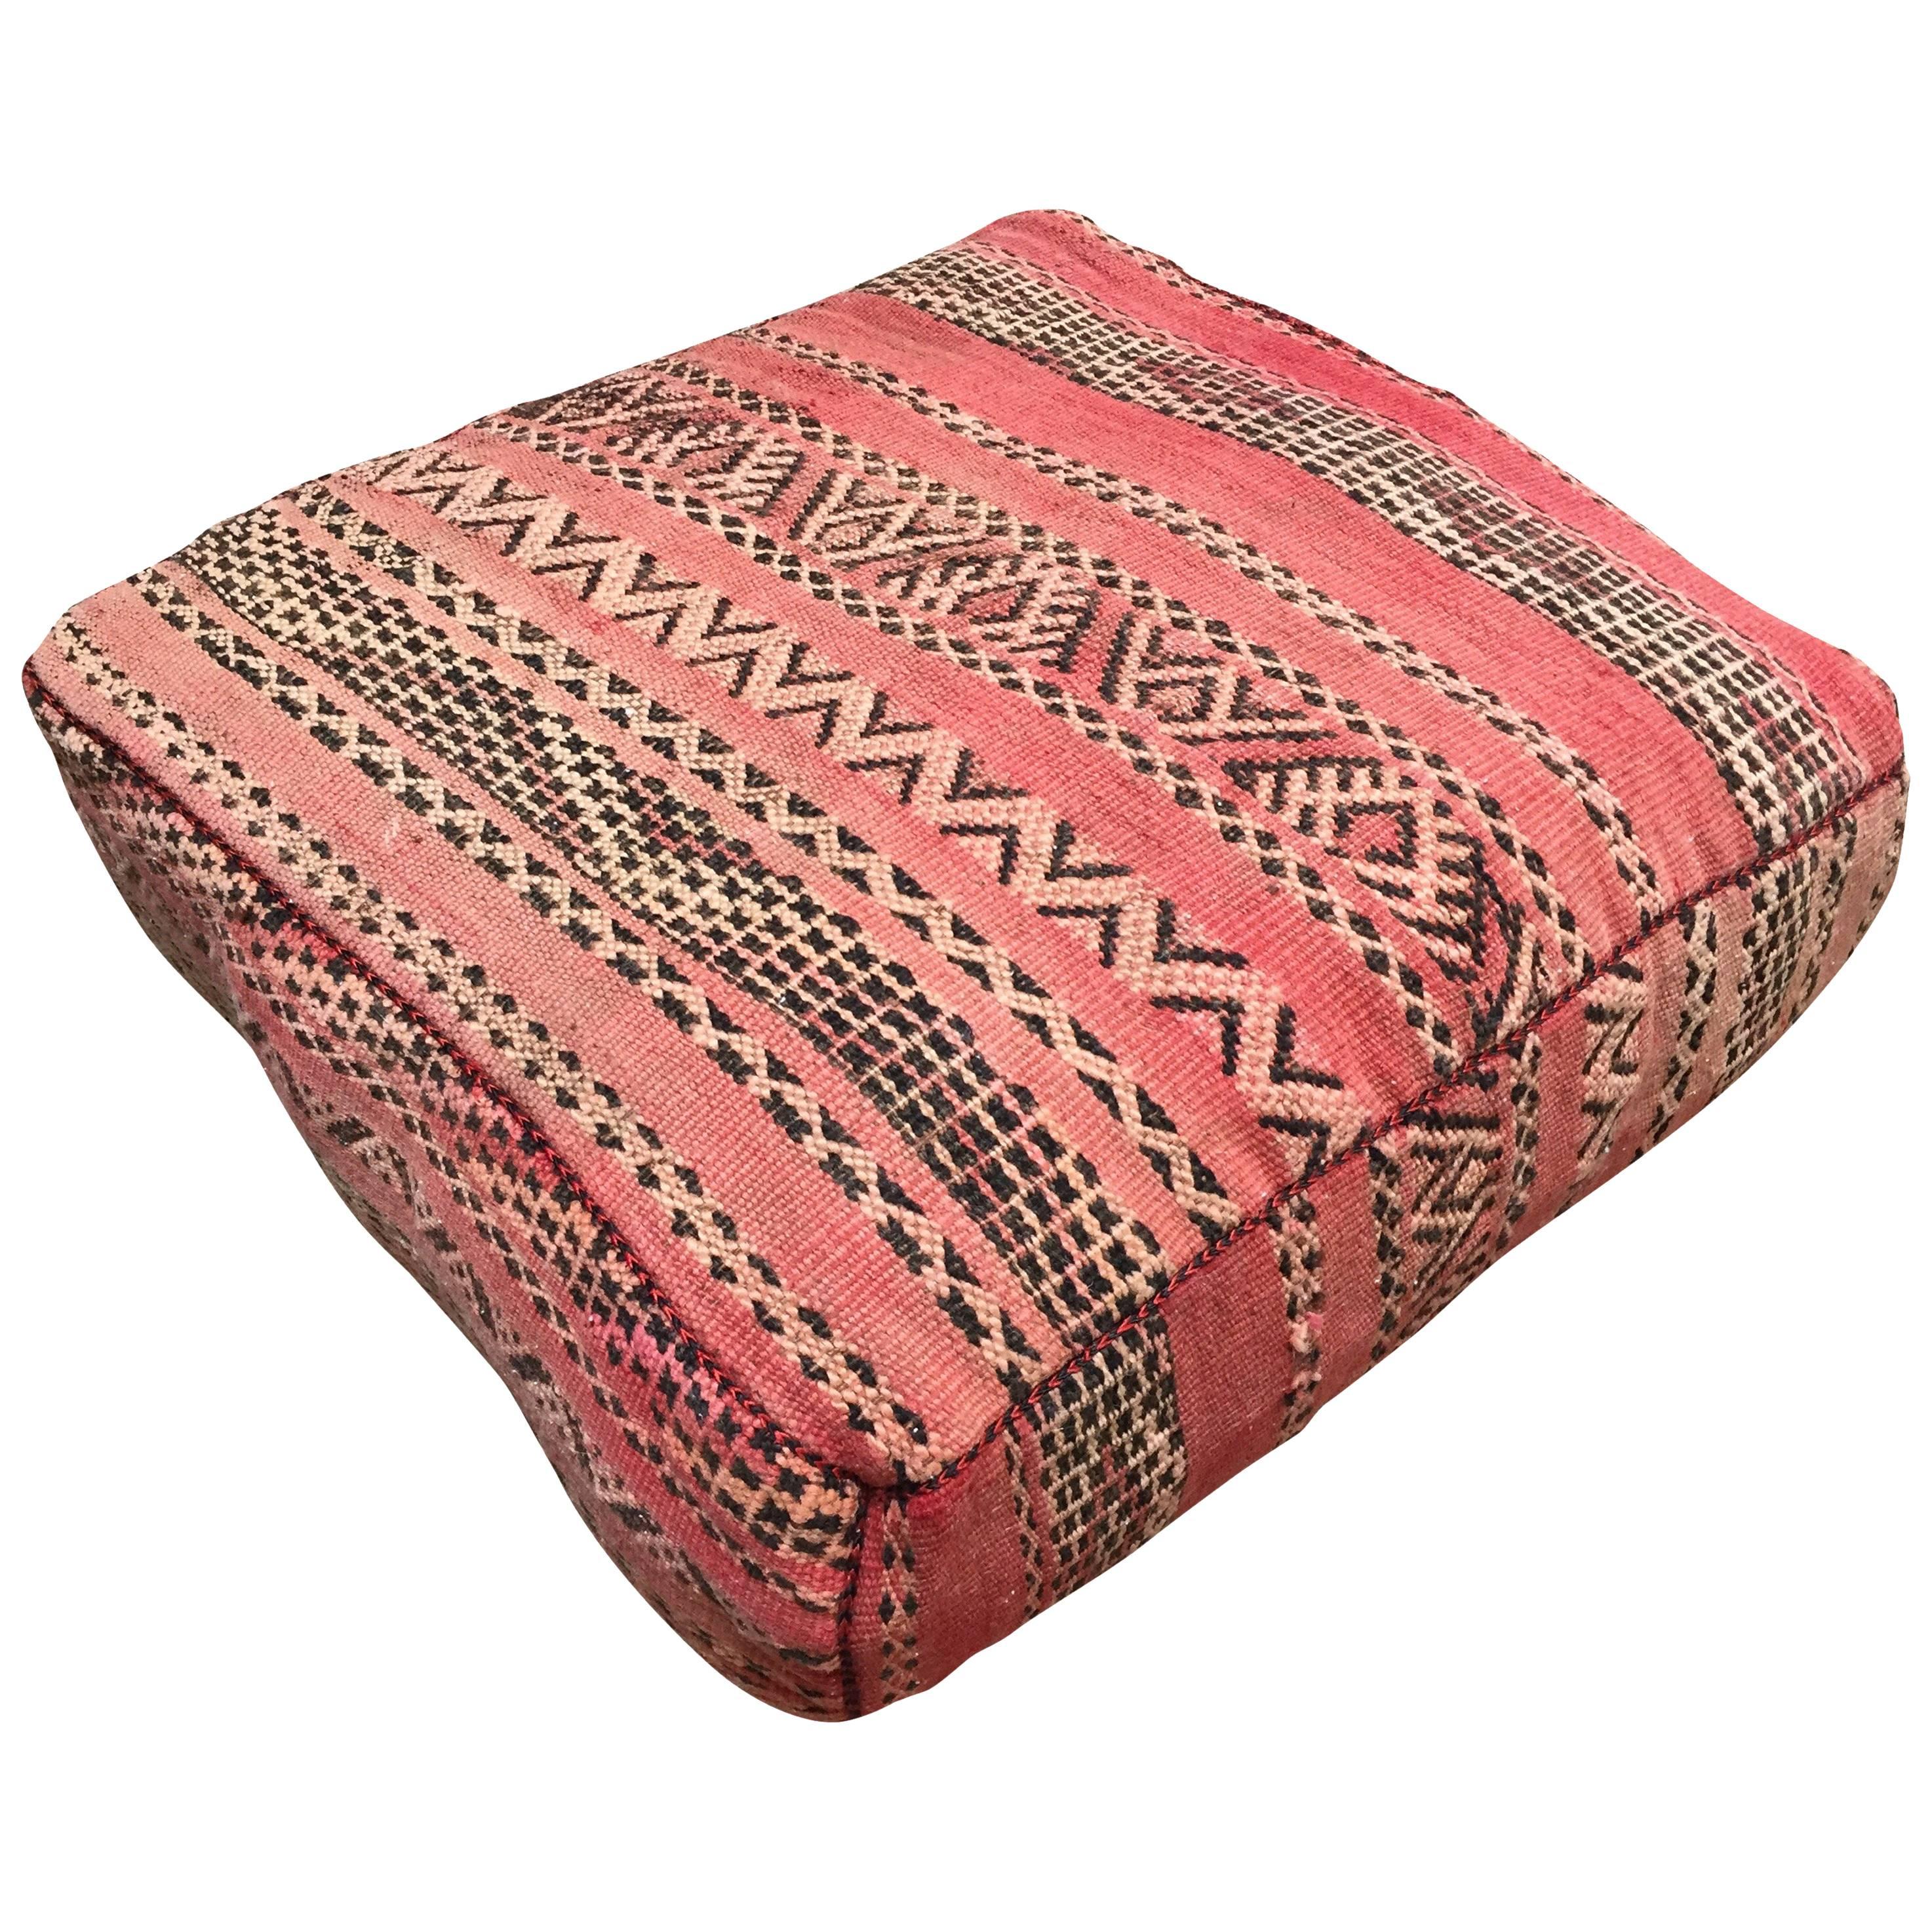 Moroccan Floor Pillow Tribal Seat Cushion Made from a Vintage Berber Rug